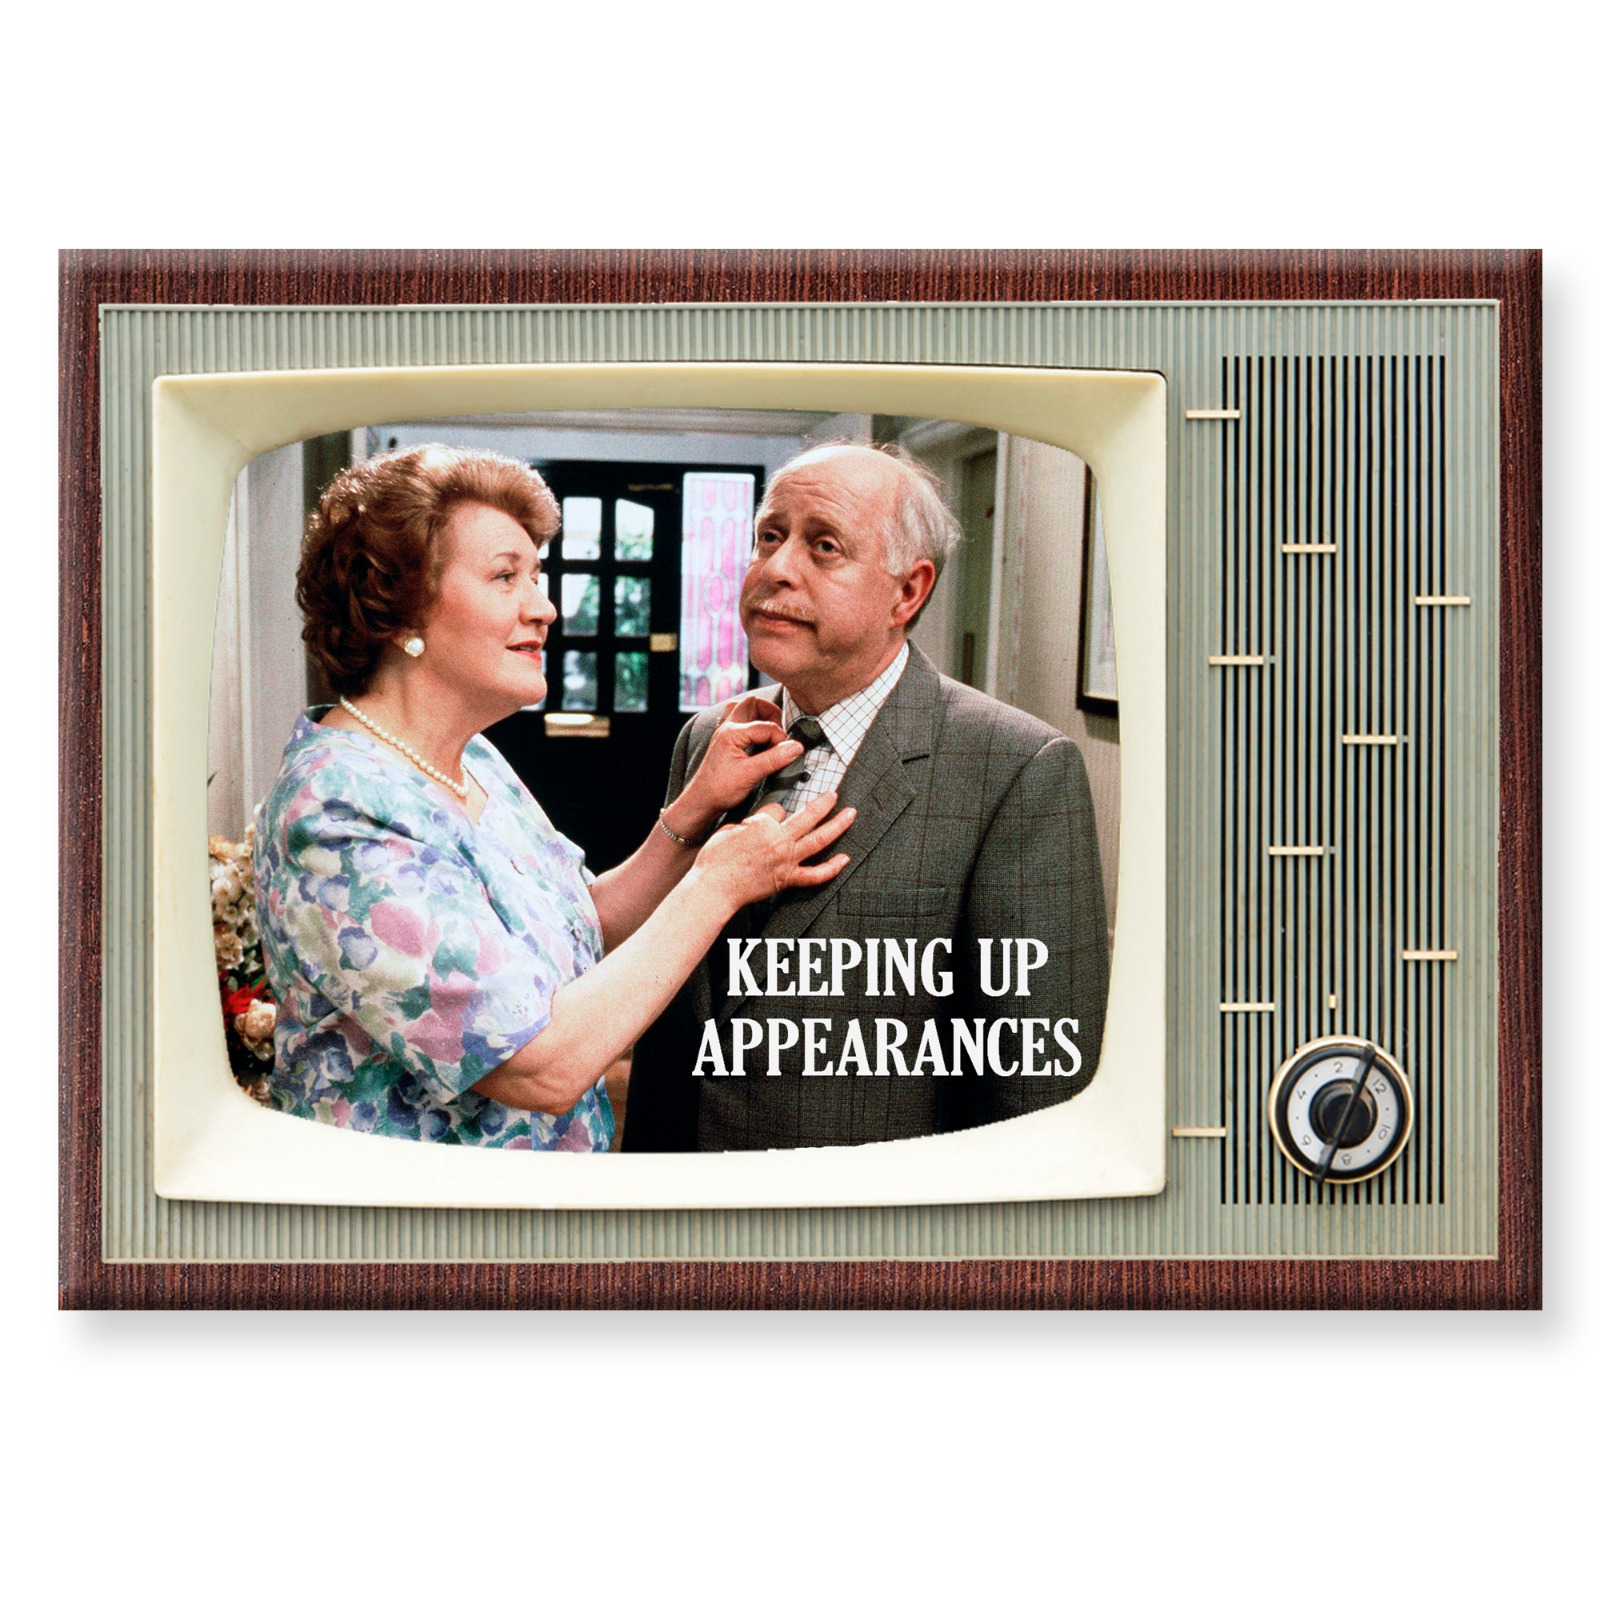 Keeping Up Appearances TV Show Classic TV 3.5 inches x 2.5 inches Fridge Magnet